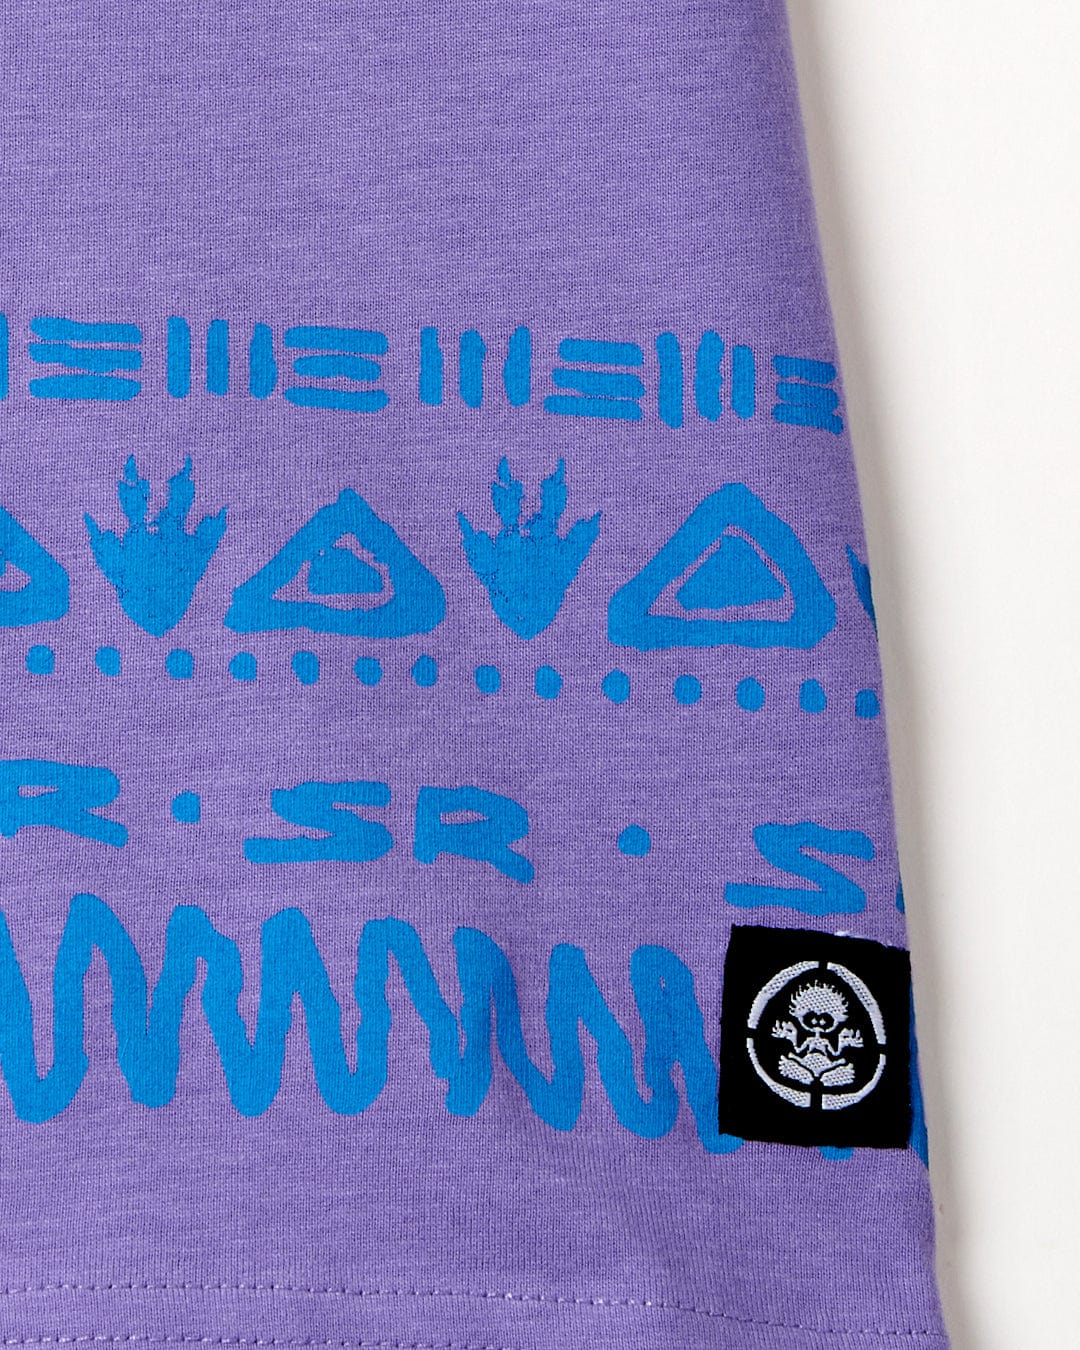 A Back in the Day - Boys Short Sleeve T-Shirt in Purple with a tribal graphic design, perfect for a bohemian style by Saltrock.